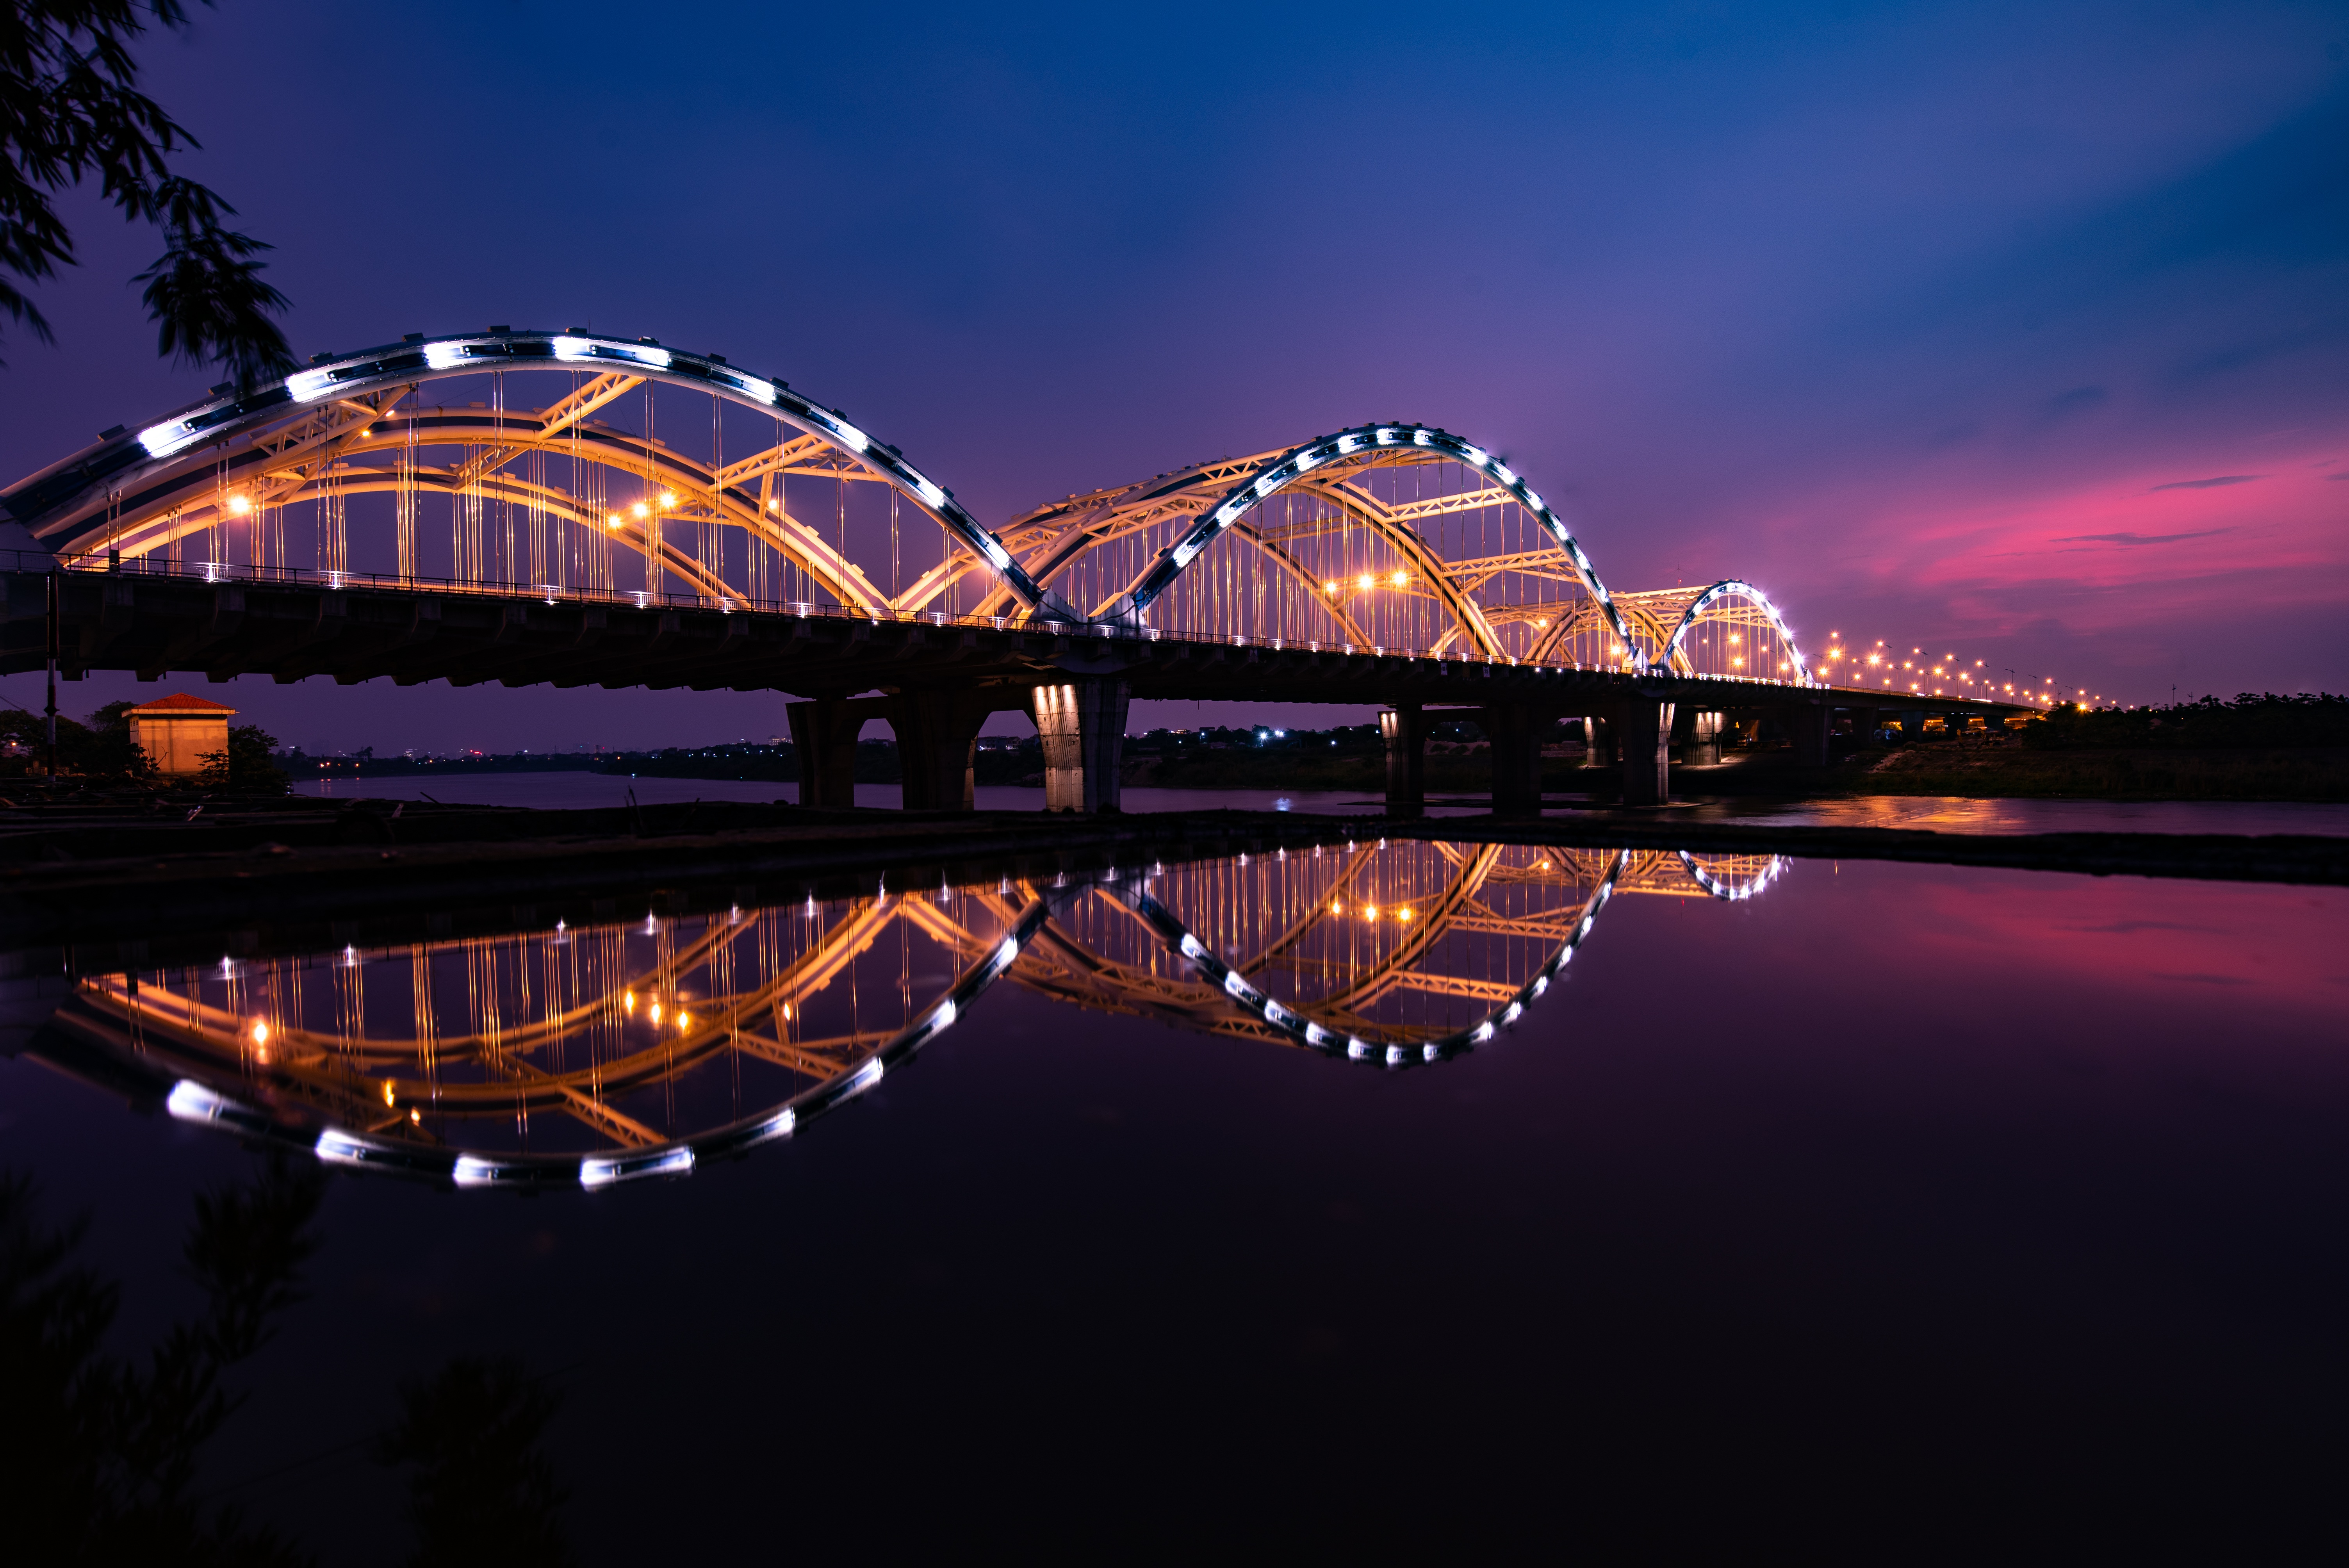 Night Lights Reflected in the Water by Quang Anh Ta